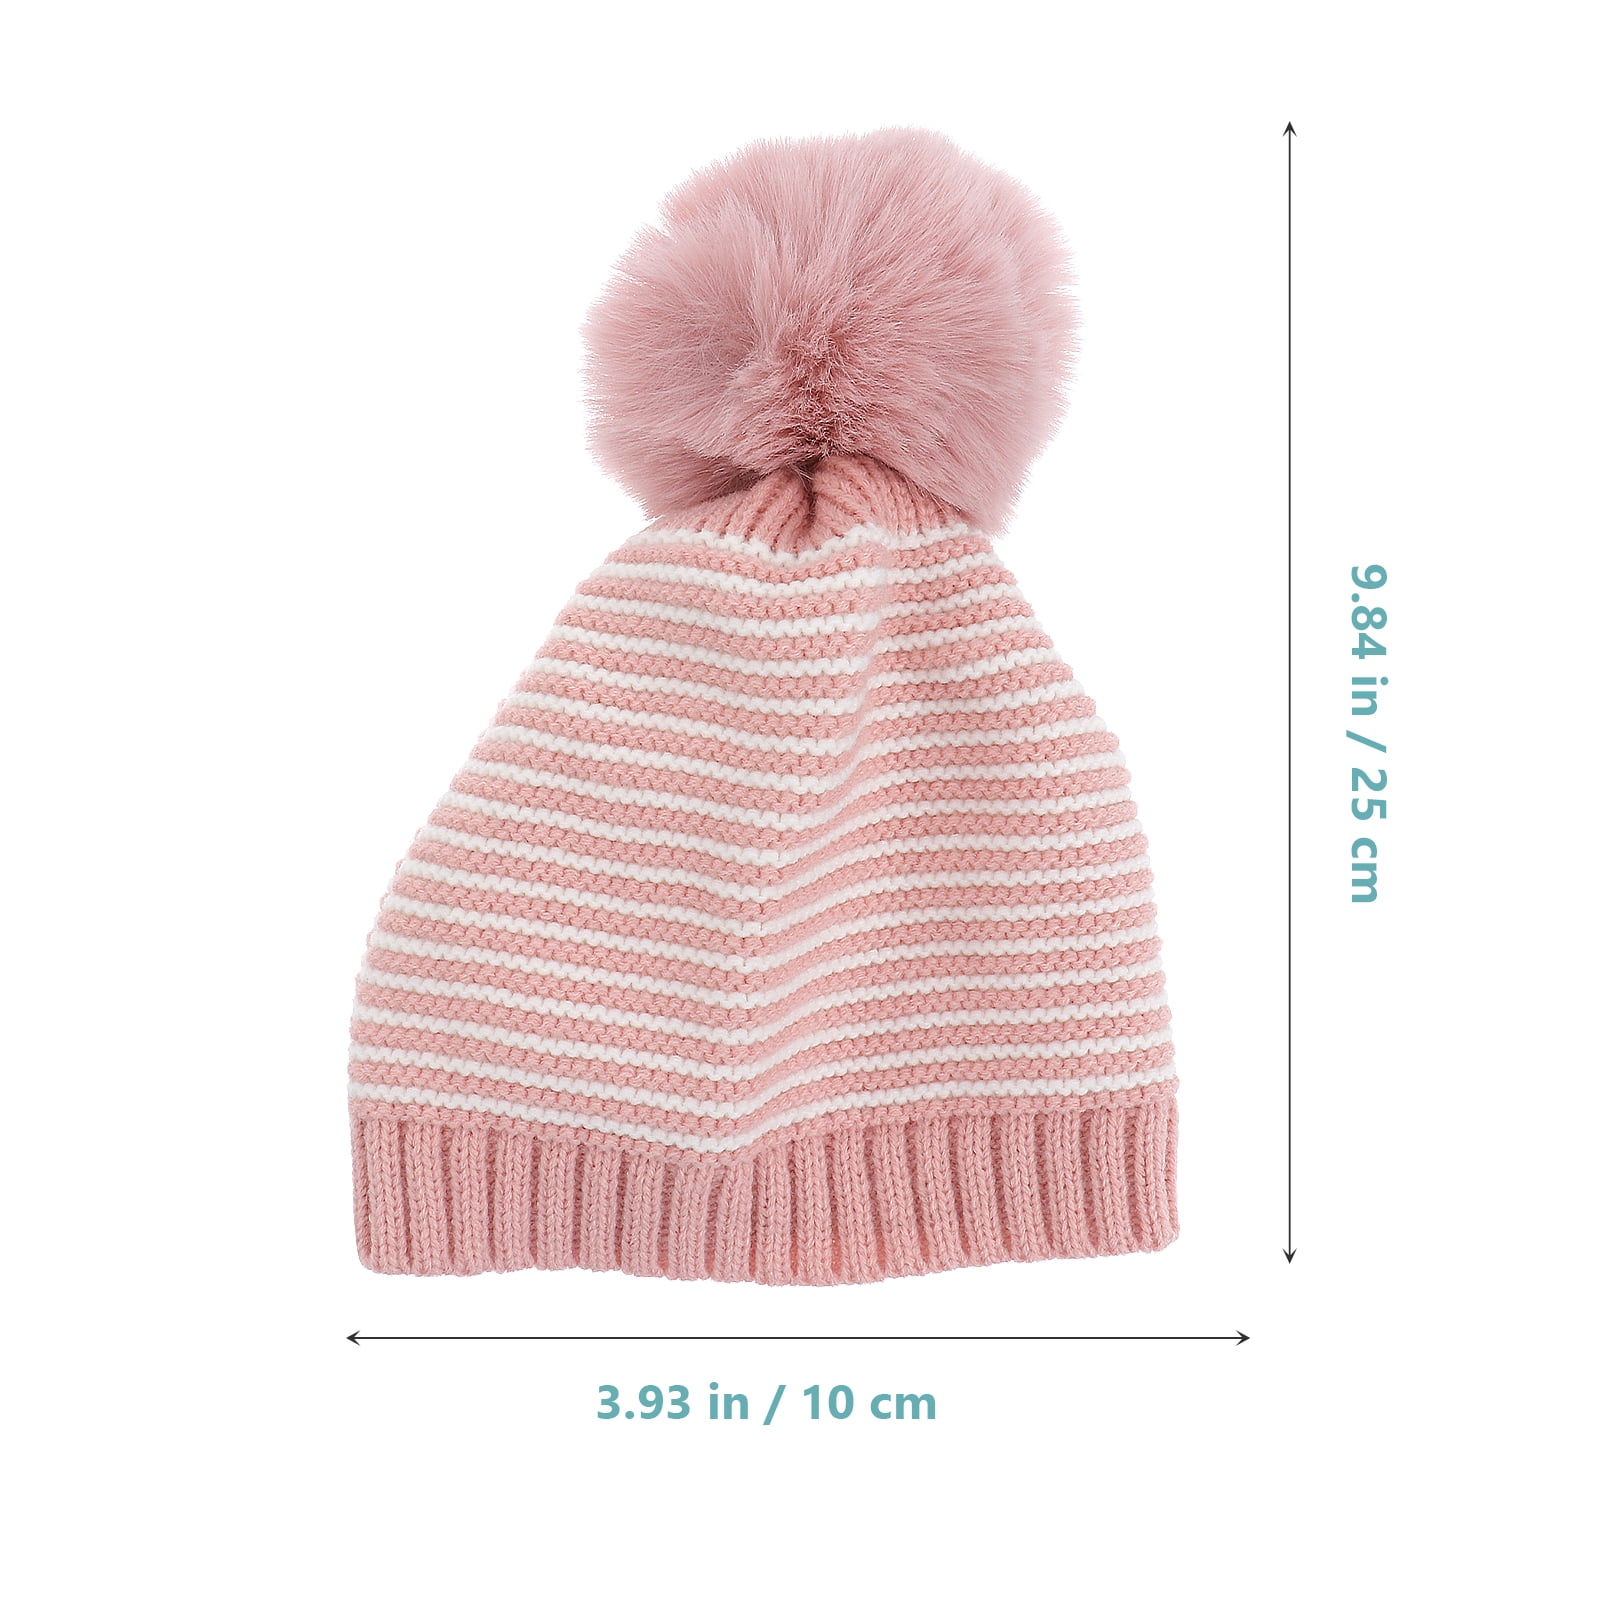 S & Adorable Striped White) Hats Hat Beanie Warm Pom for Christmas Pom Kids (Pink Knit - Classic Winter